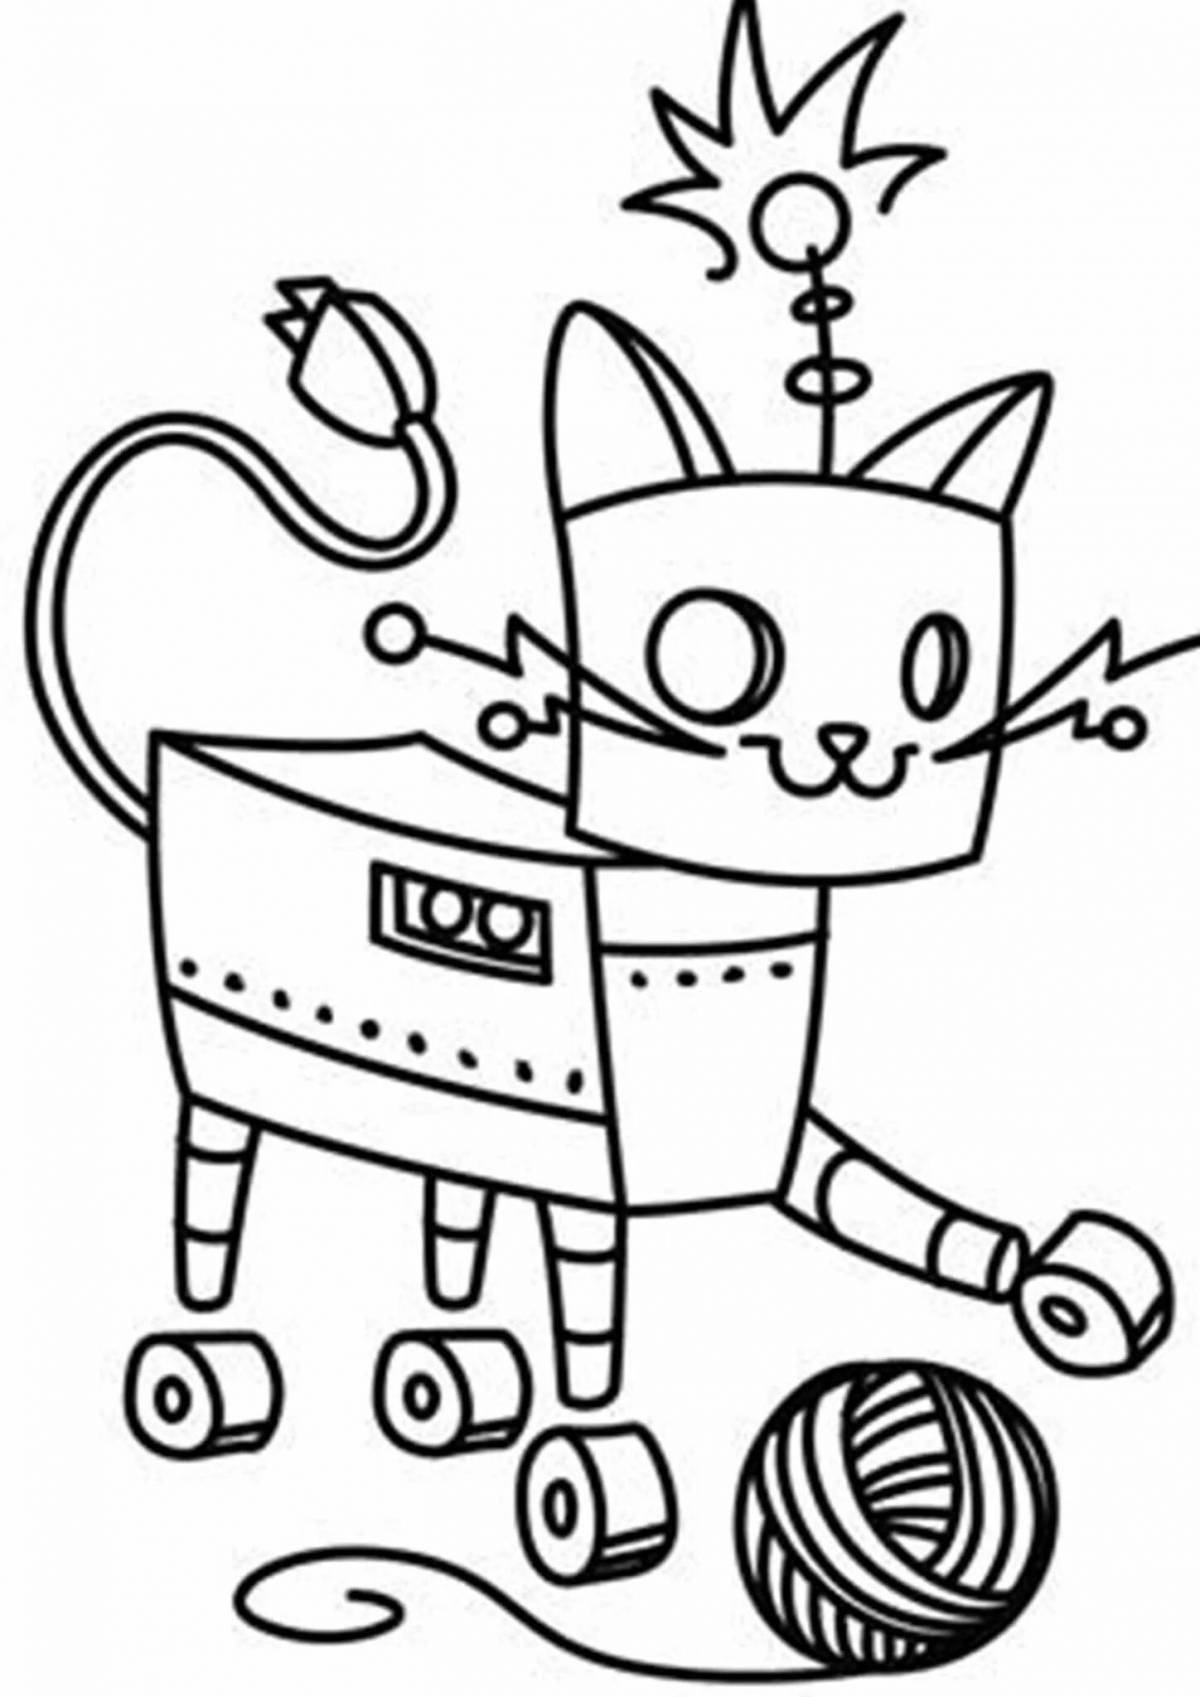 Gorgeous robot cat coloring page